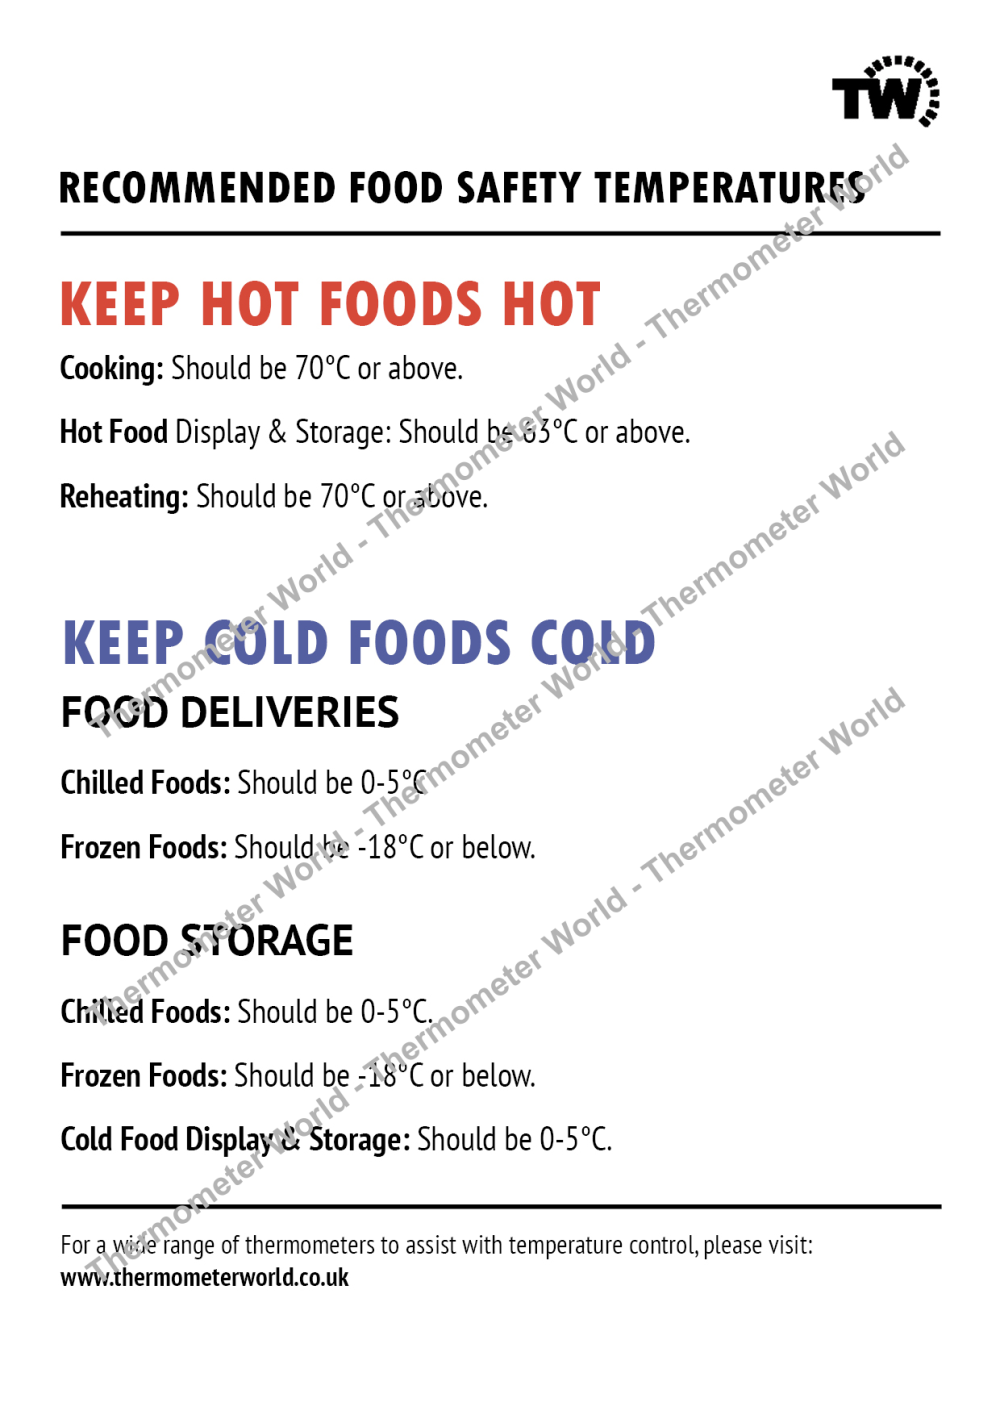 Thermometer World - Food Safety Temperatures